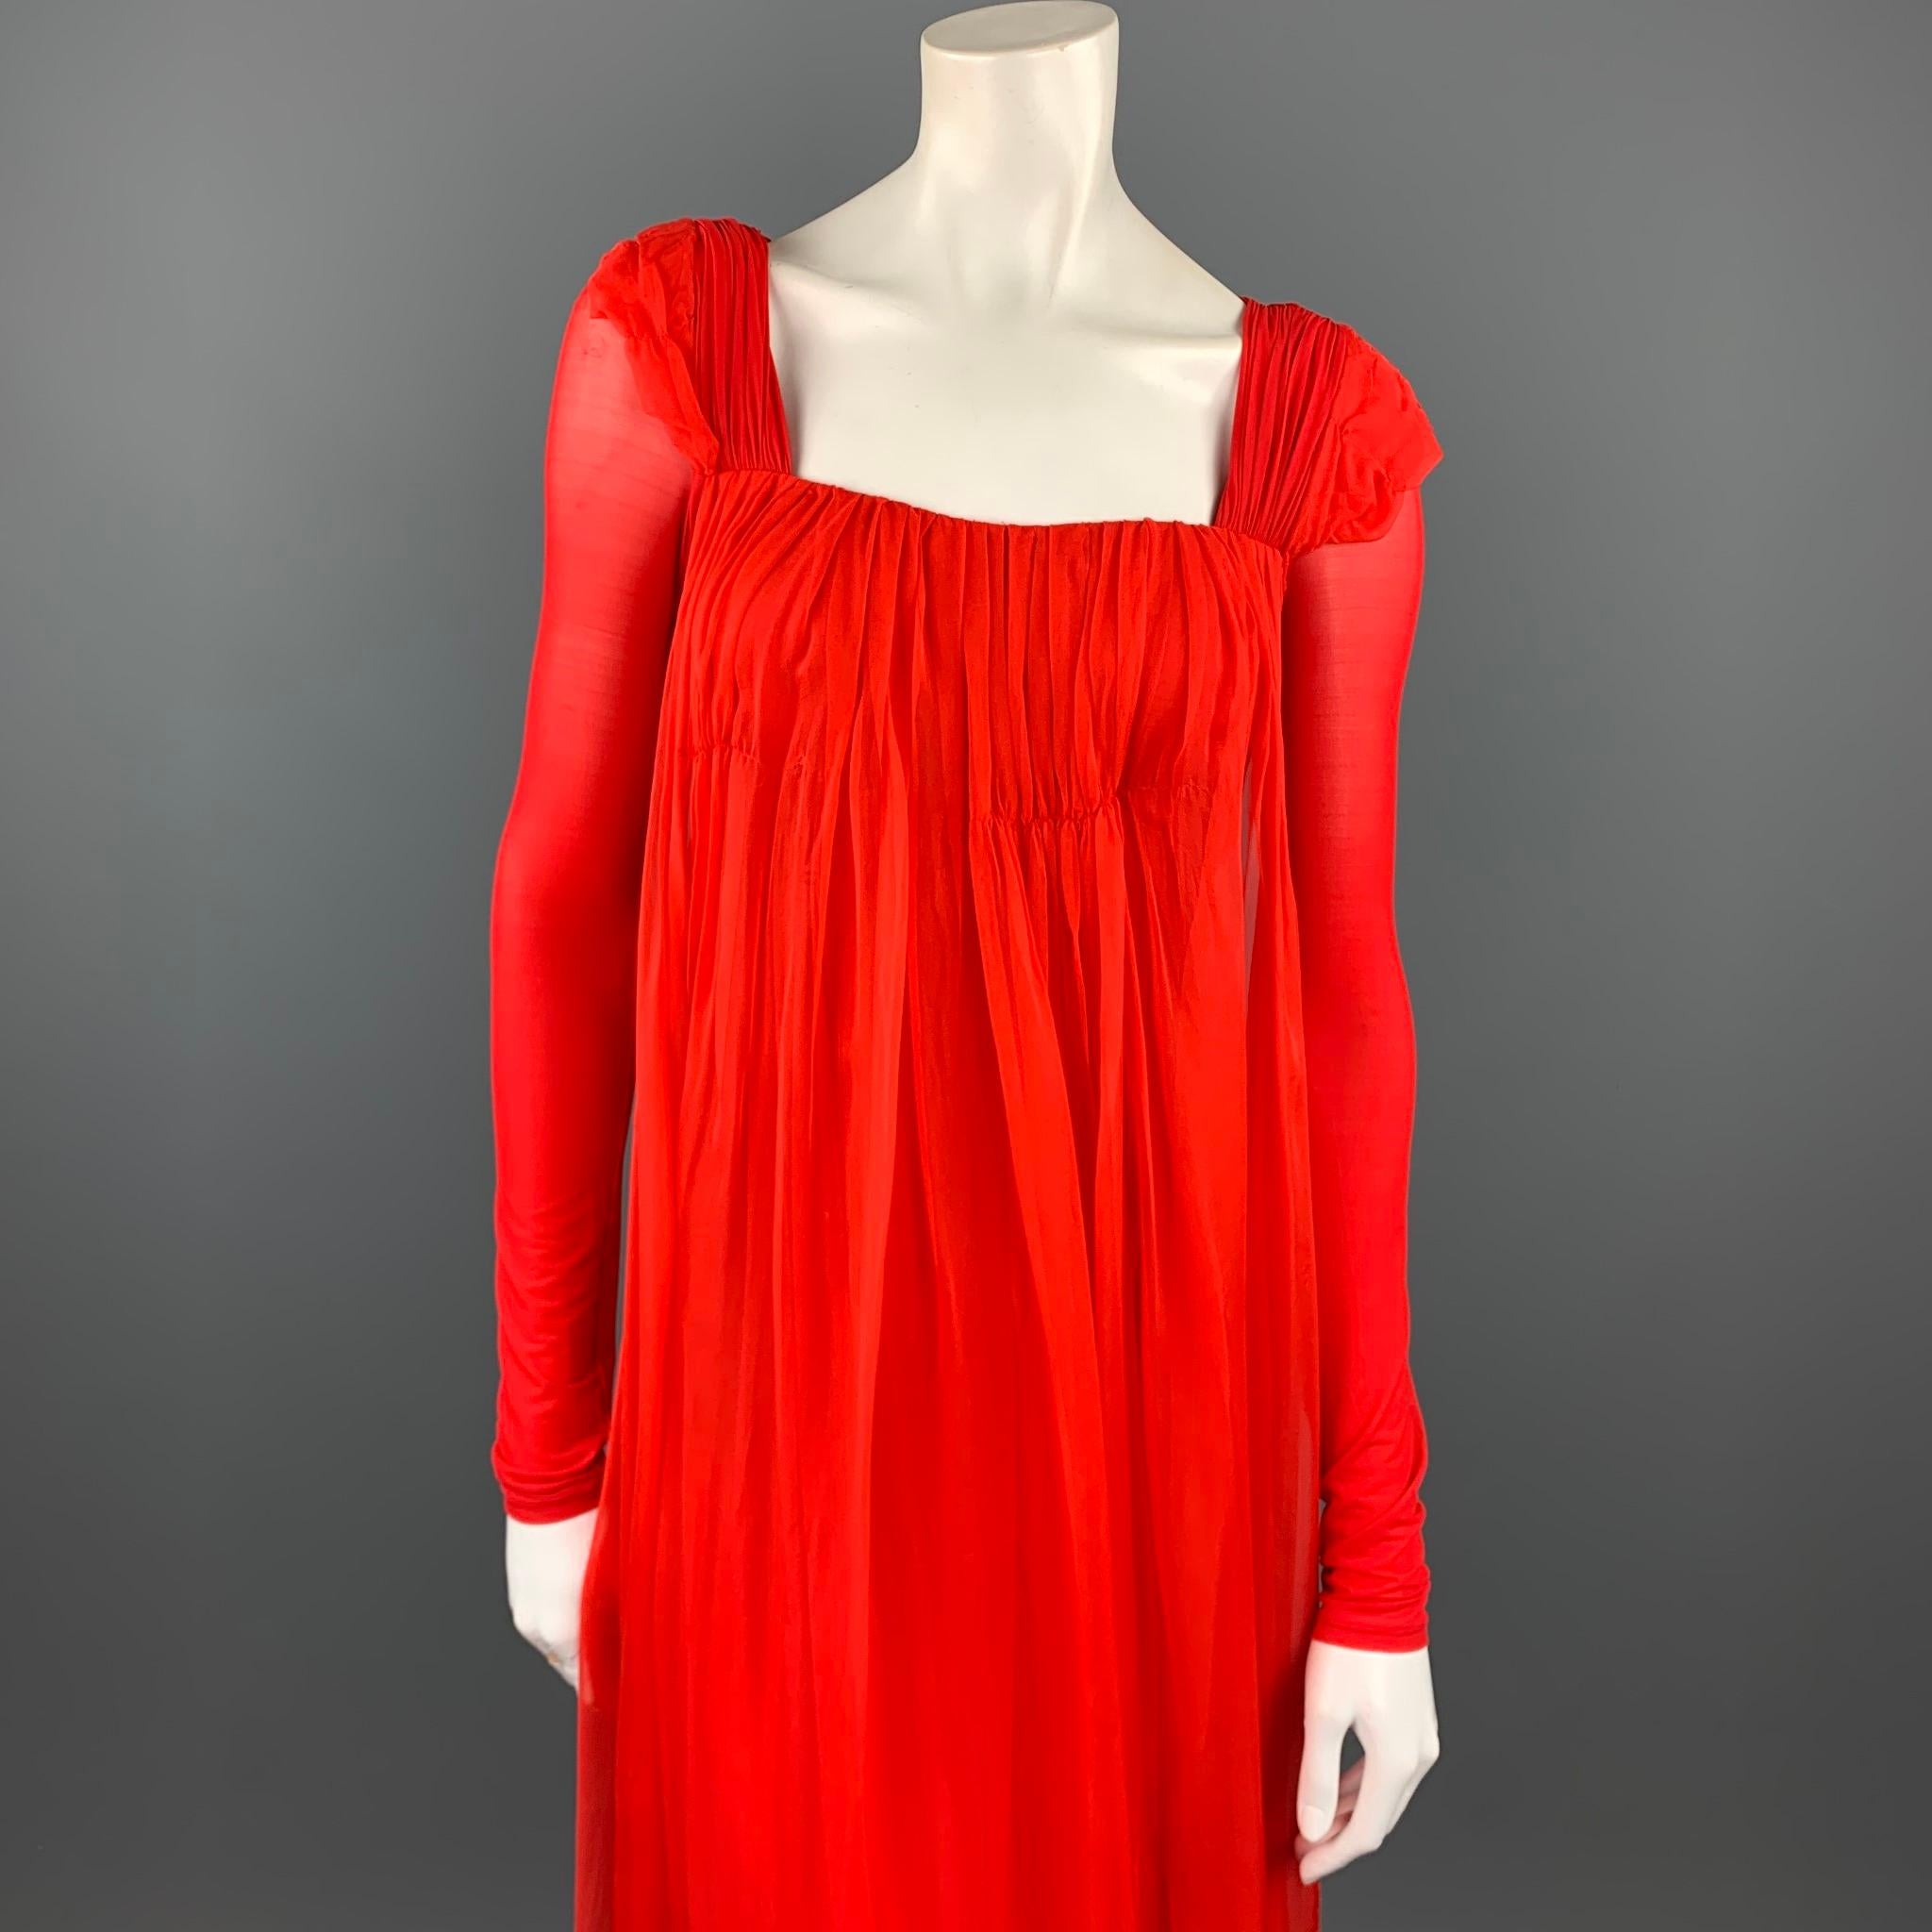 DONNA KARA evening gown comes in a red cupro blend featuring a silk overlay detail, padded shoulders, elastic waistband, and a ruched back design. As-Is. Made in Italy.

Good Pre-Owned Condition.
Marked: No size marked

Measurements:

Shoulder: 16.5